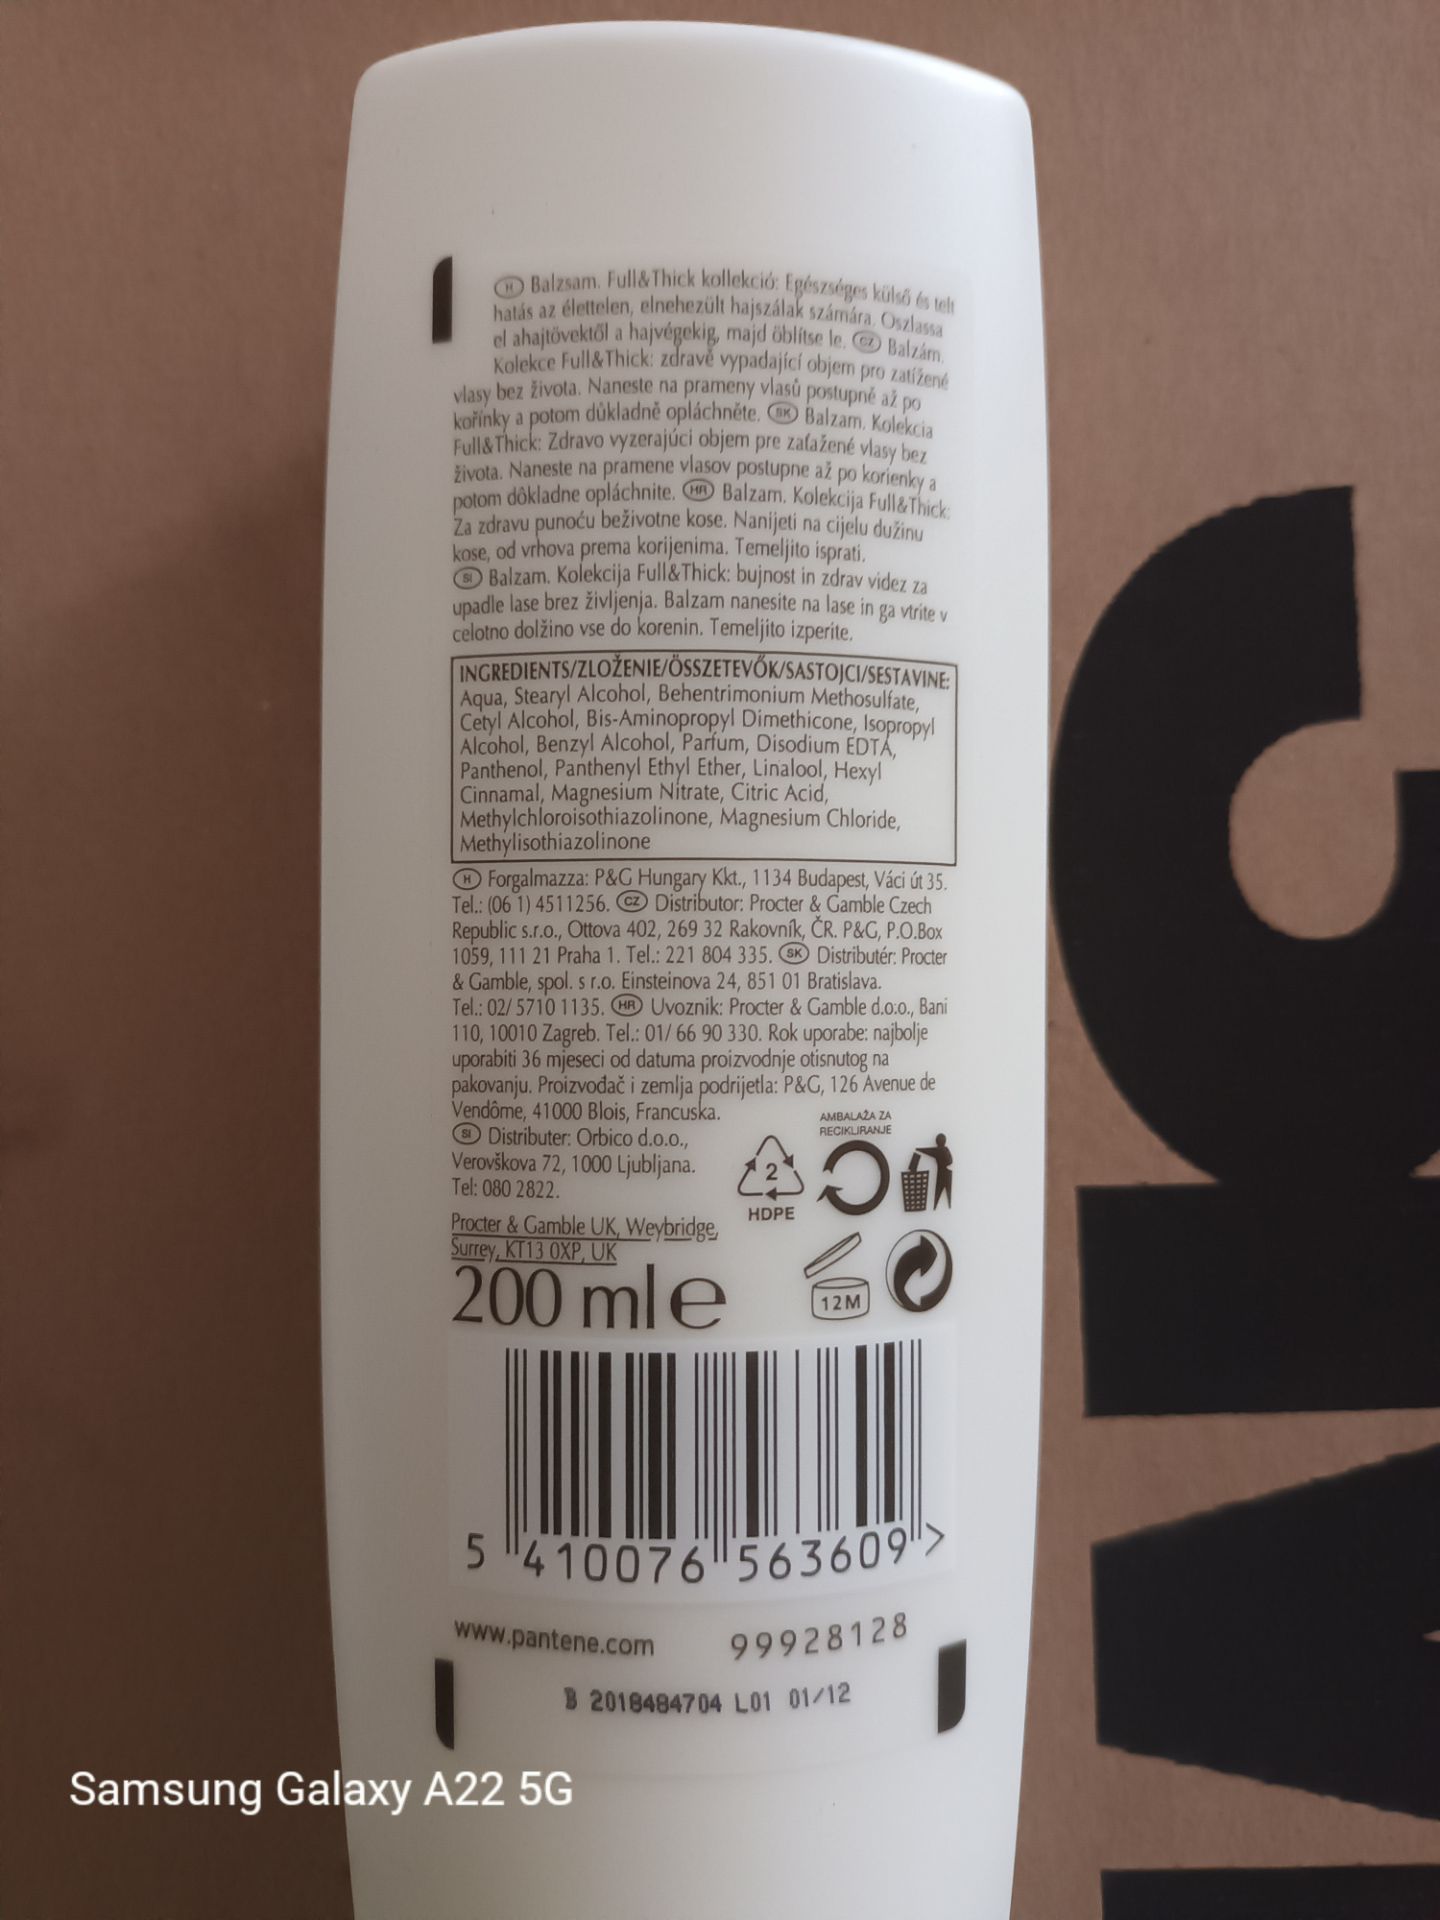 108 X 200ML PANTENE PRO-V FULL AND THICK BALSAM CONDITIONER - Image 2 of 2